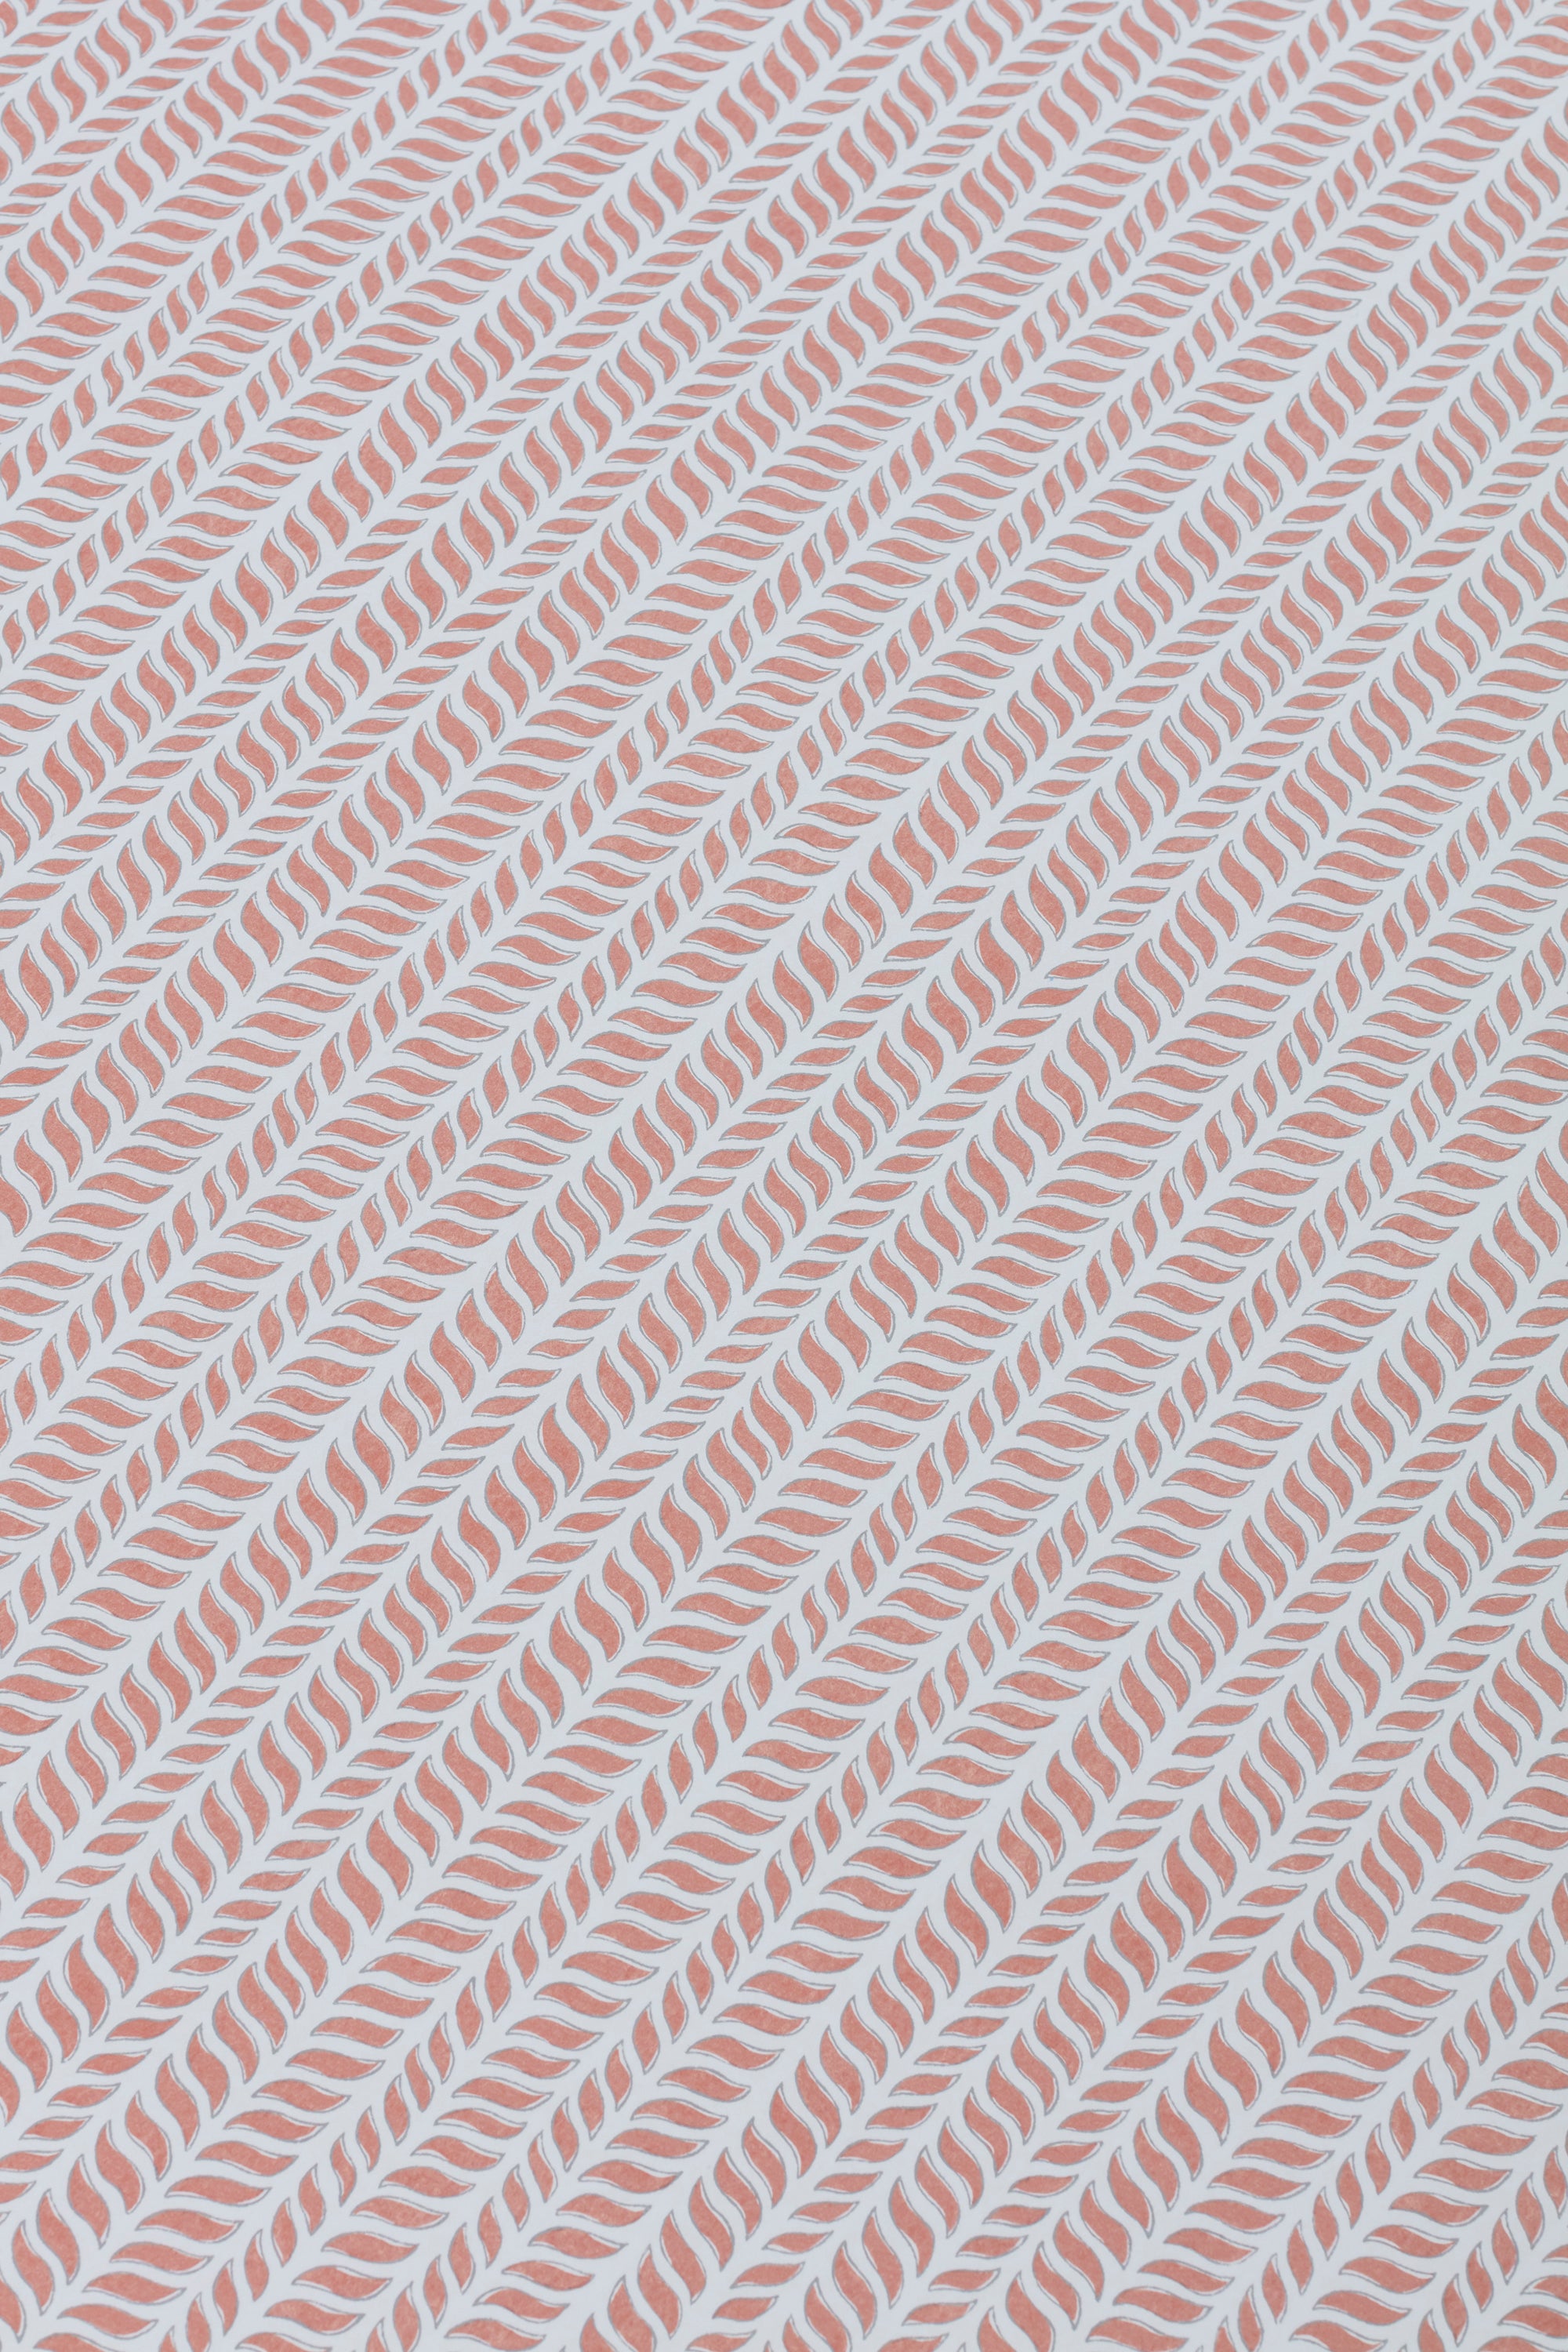 Detail of a wallpaper panel in a painterly herringbone print in pink on a light blue field.